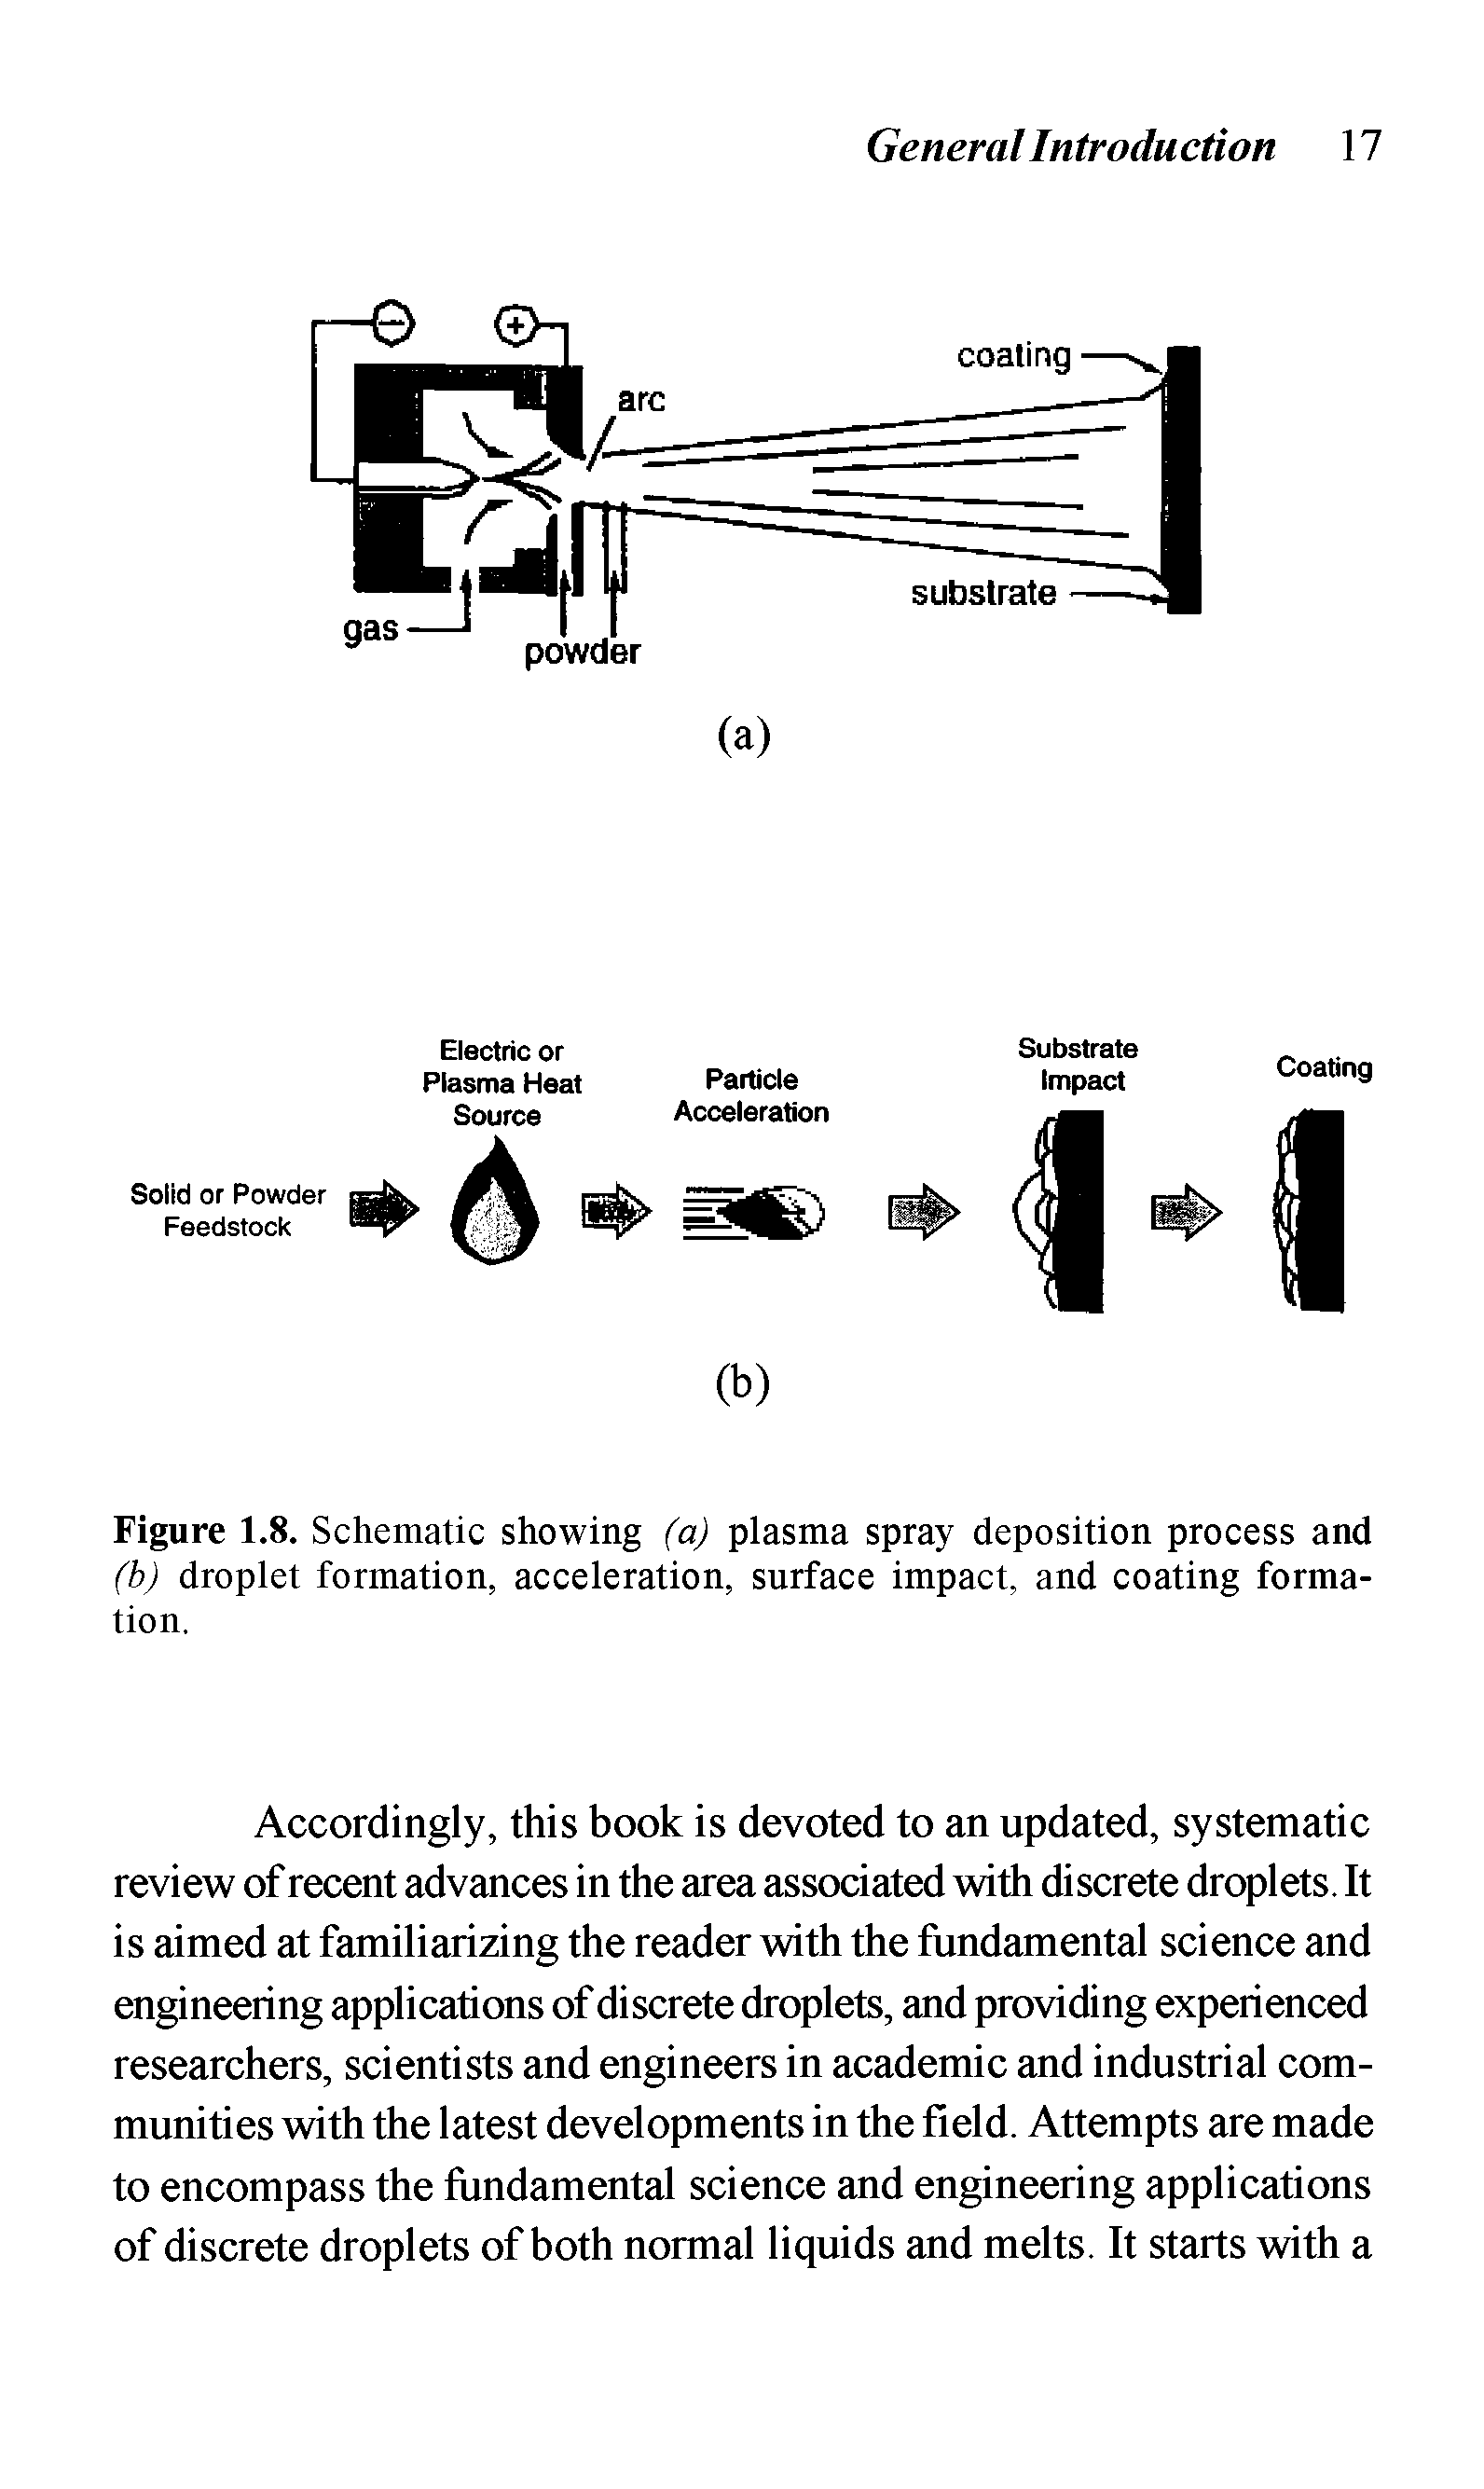 Figure 1.8. Schematic showing (a) plasma spray deposition process and (b) droplet formation, acceleration, surface impact, and coating formation.